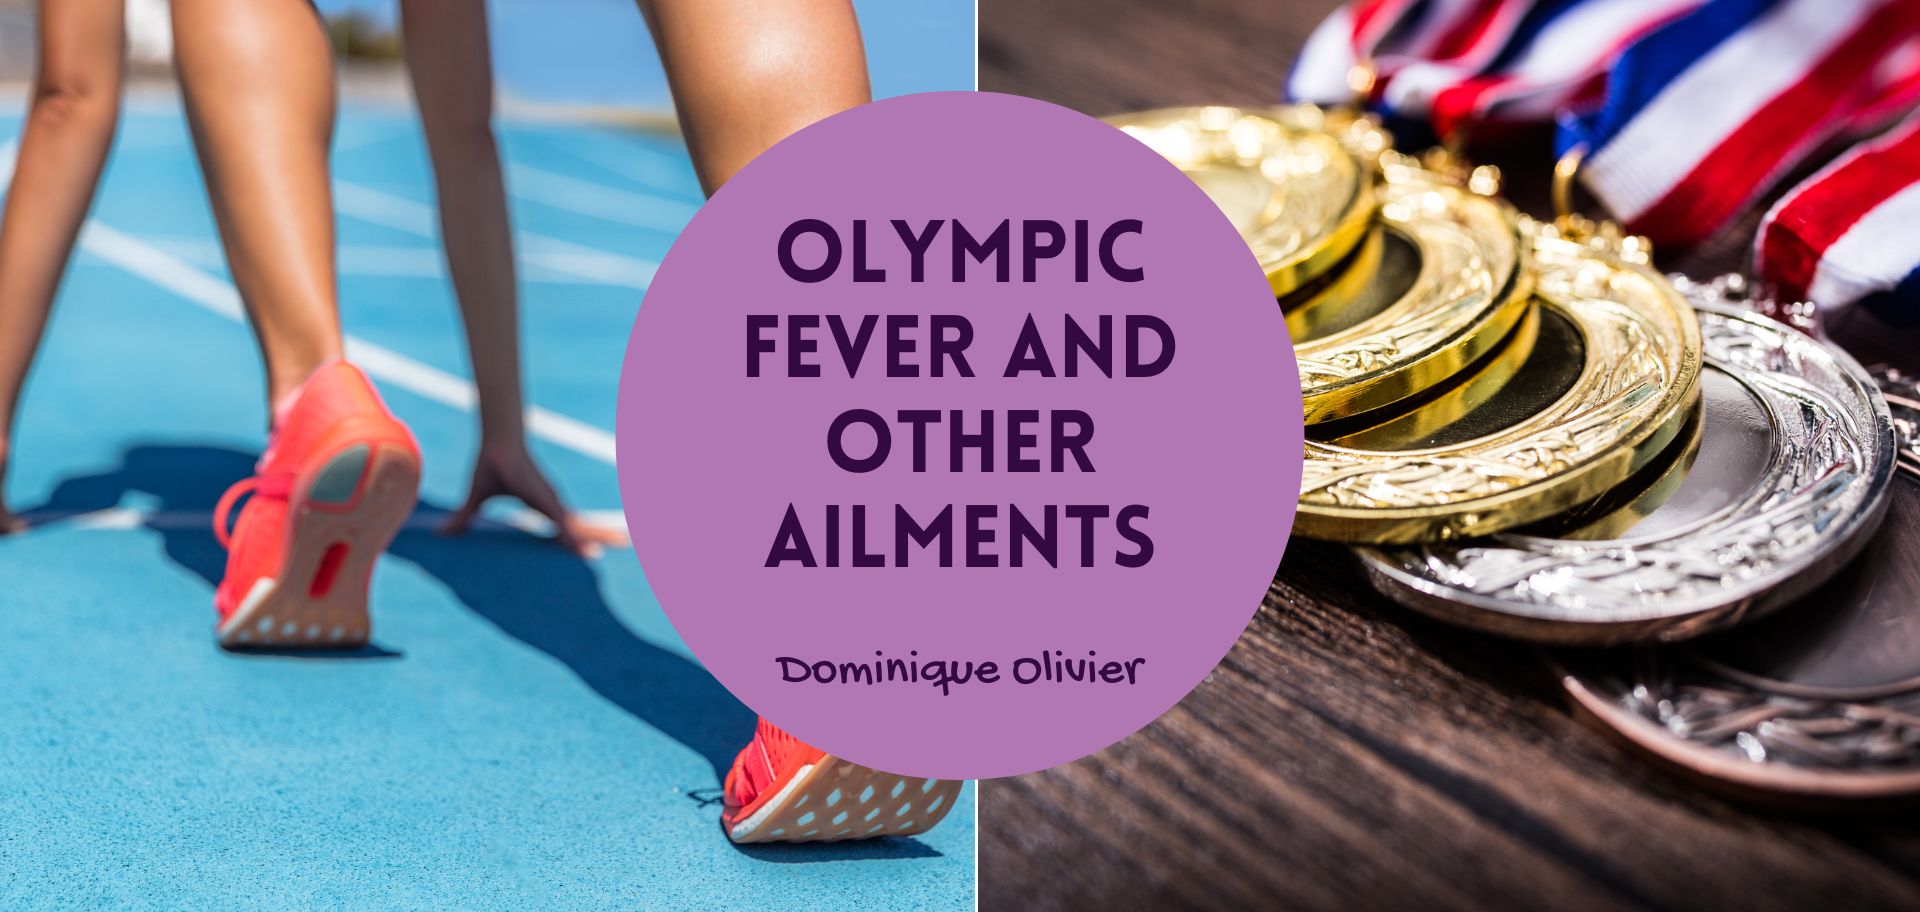 Olympic fever and other ailments